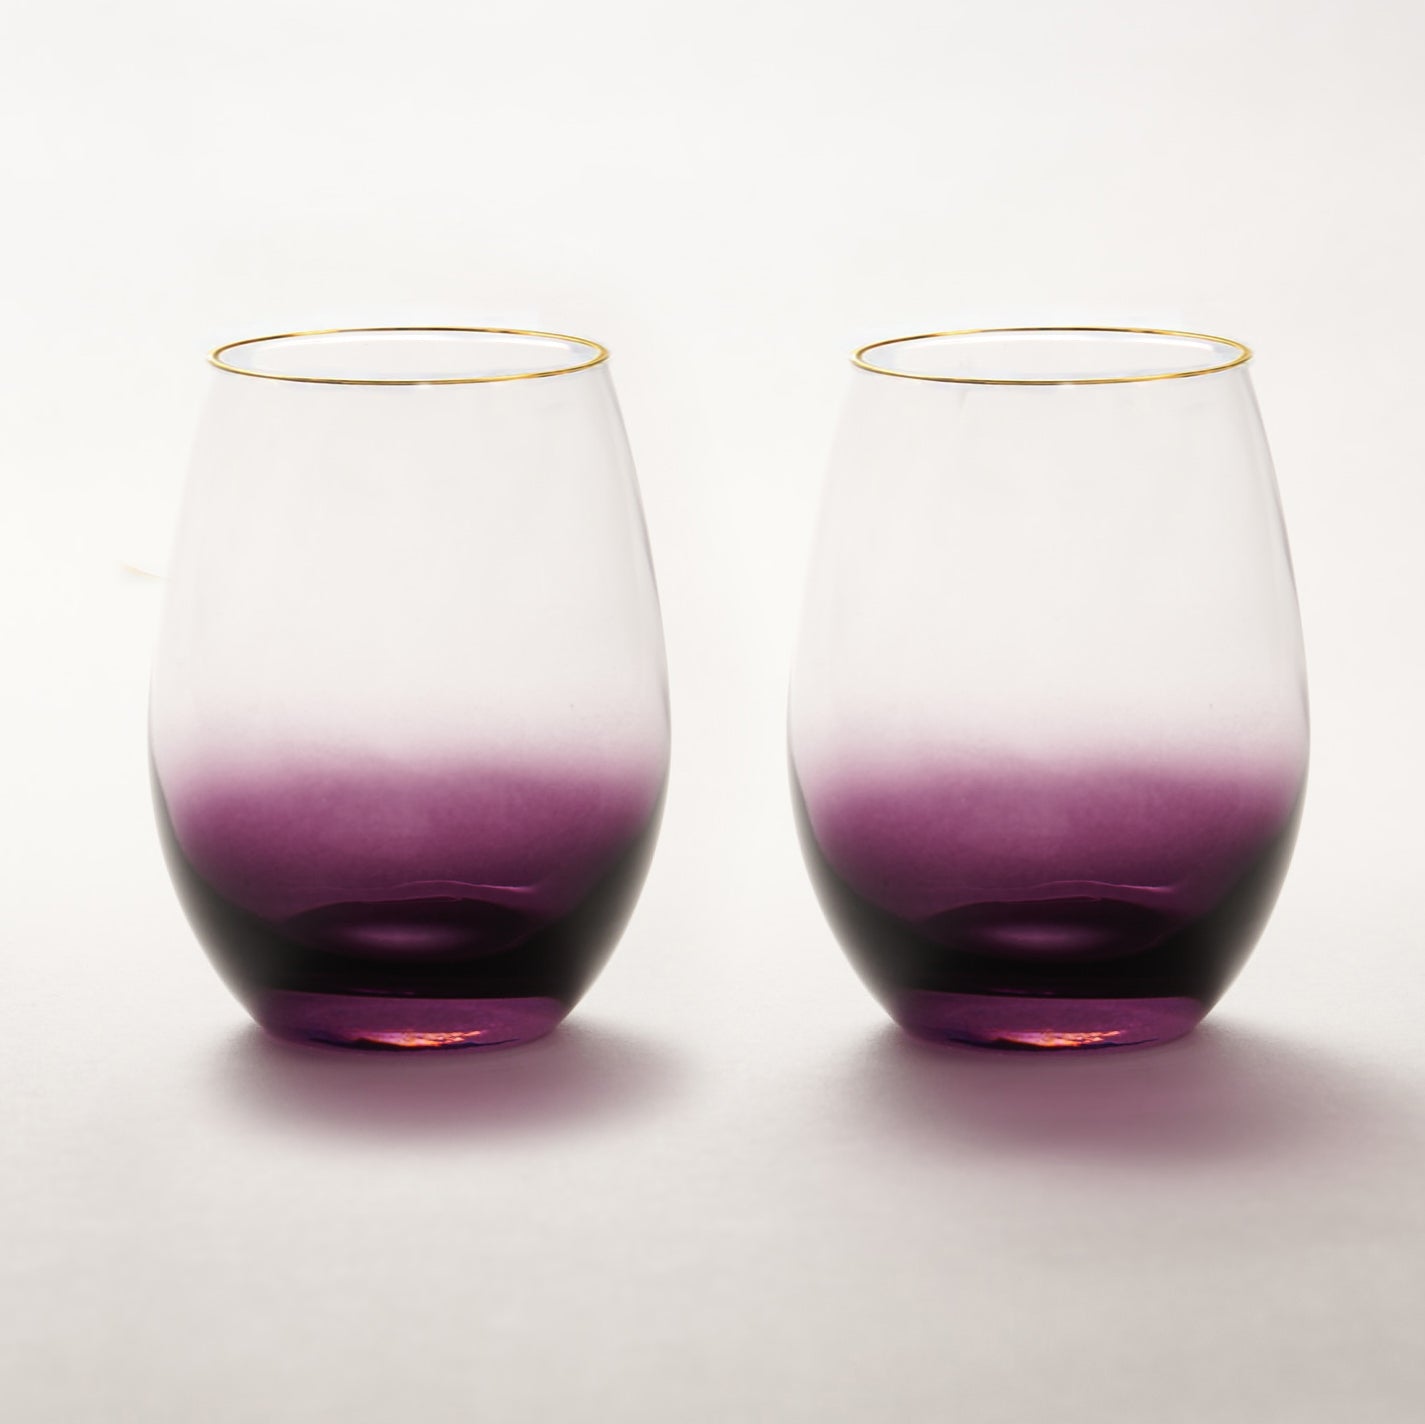 Time to get the fancy glassware out - Katie Alice pink ombre wine glasses